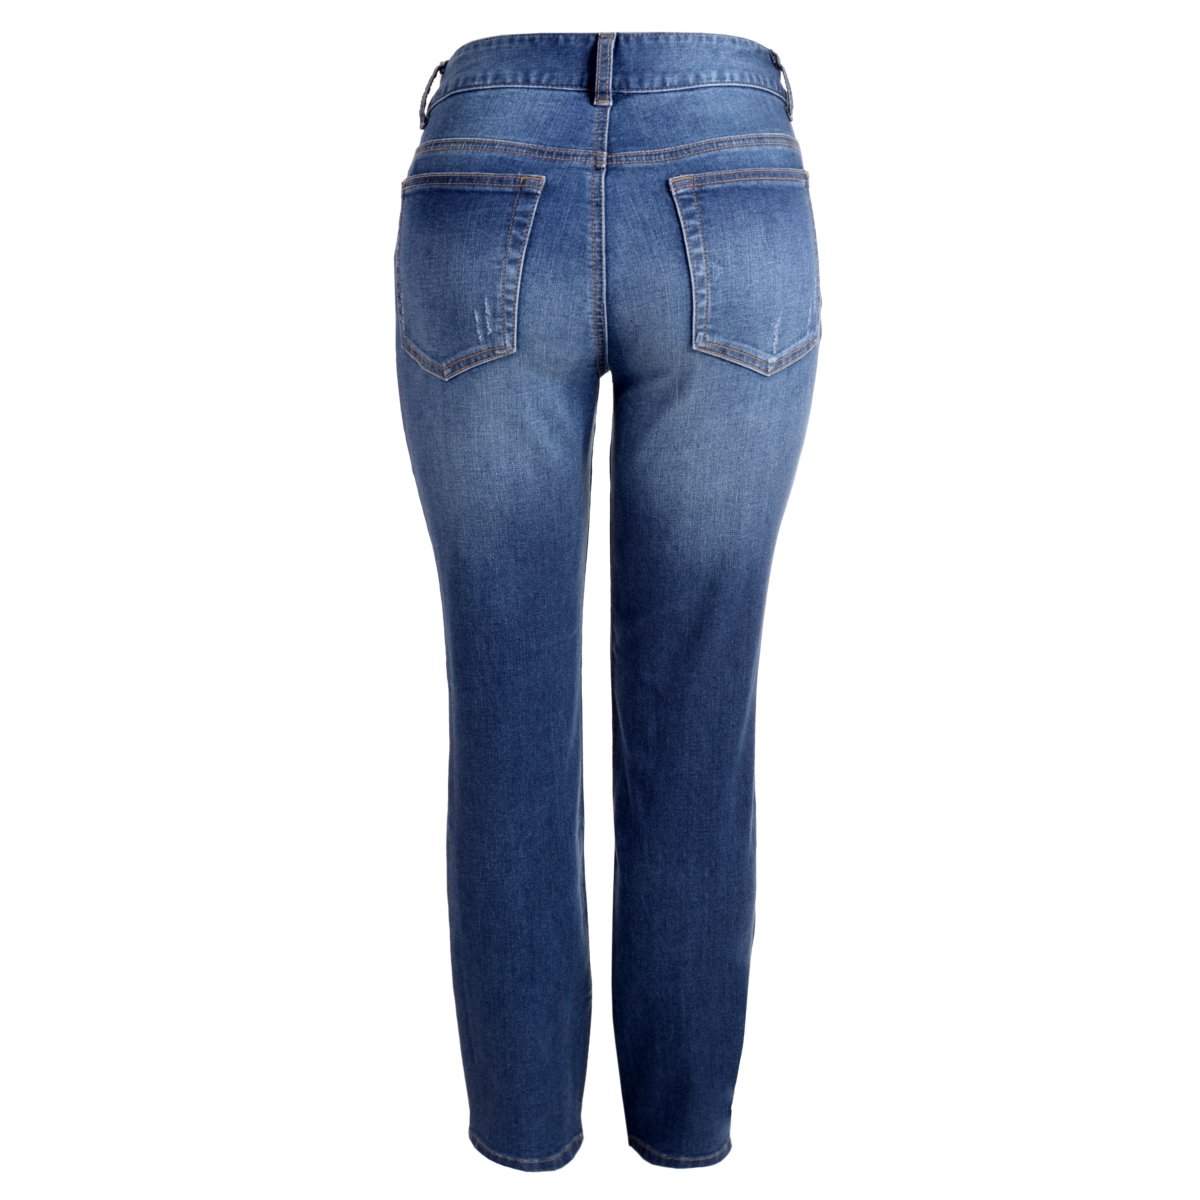 Jeans Skyes, Corte Recto